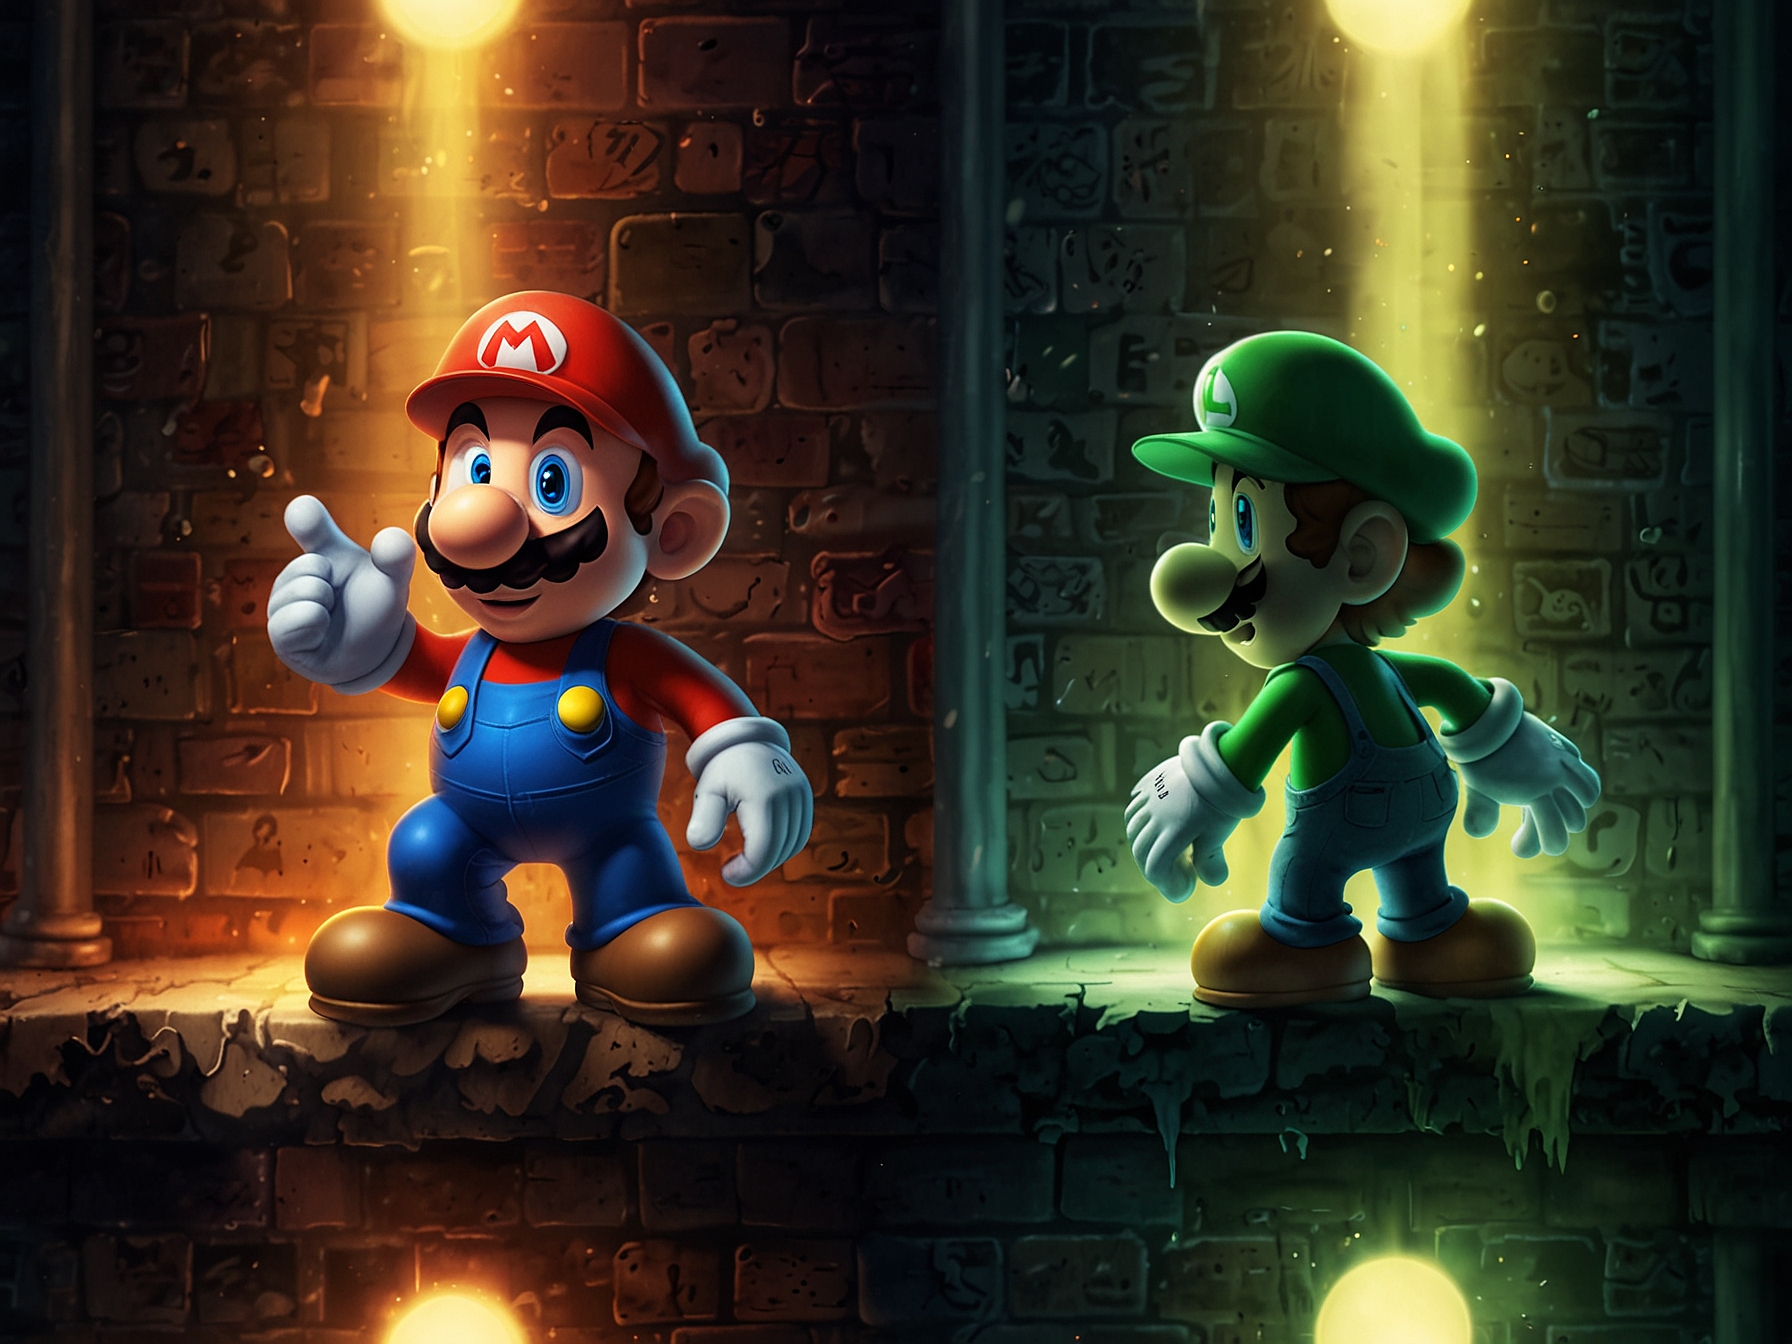 A nostalgic collage highlighting key moments from past Mario & Luigi games, with a spotlight on the developers' mysterious involvement in the new installment, Brothership.